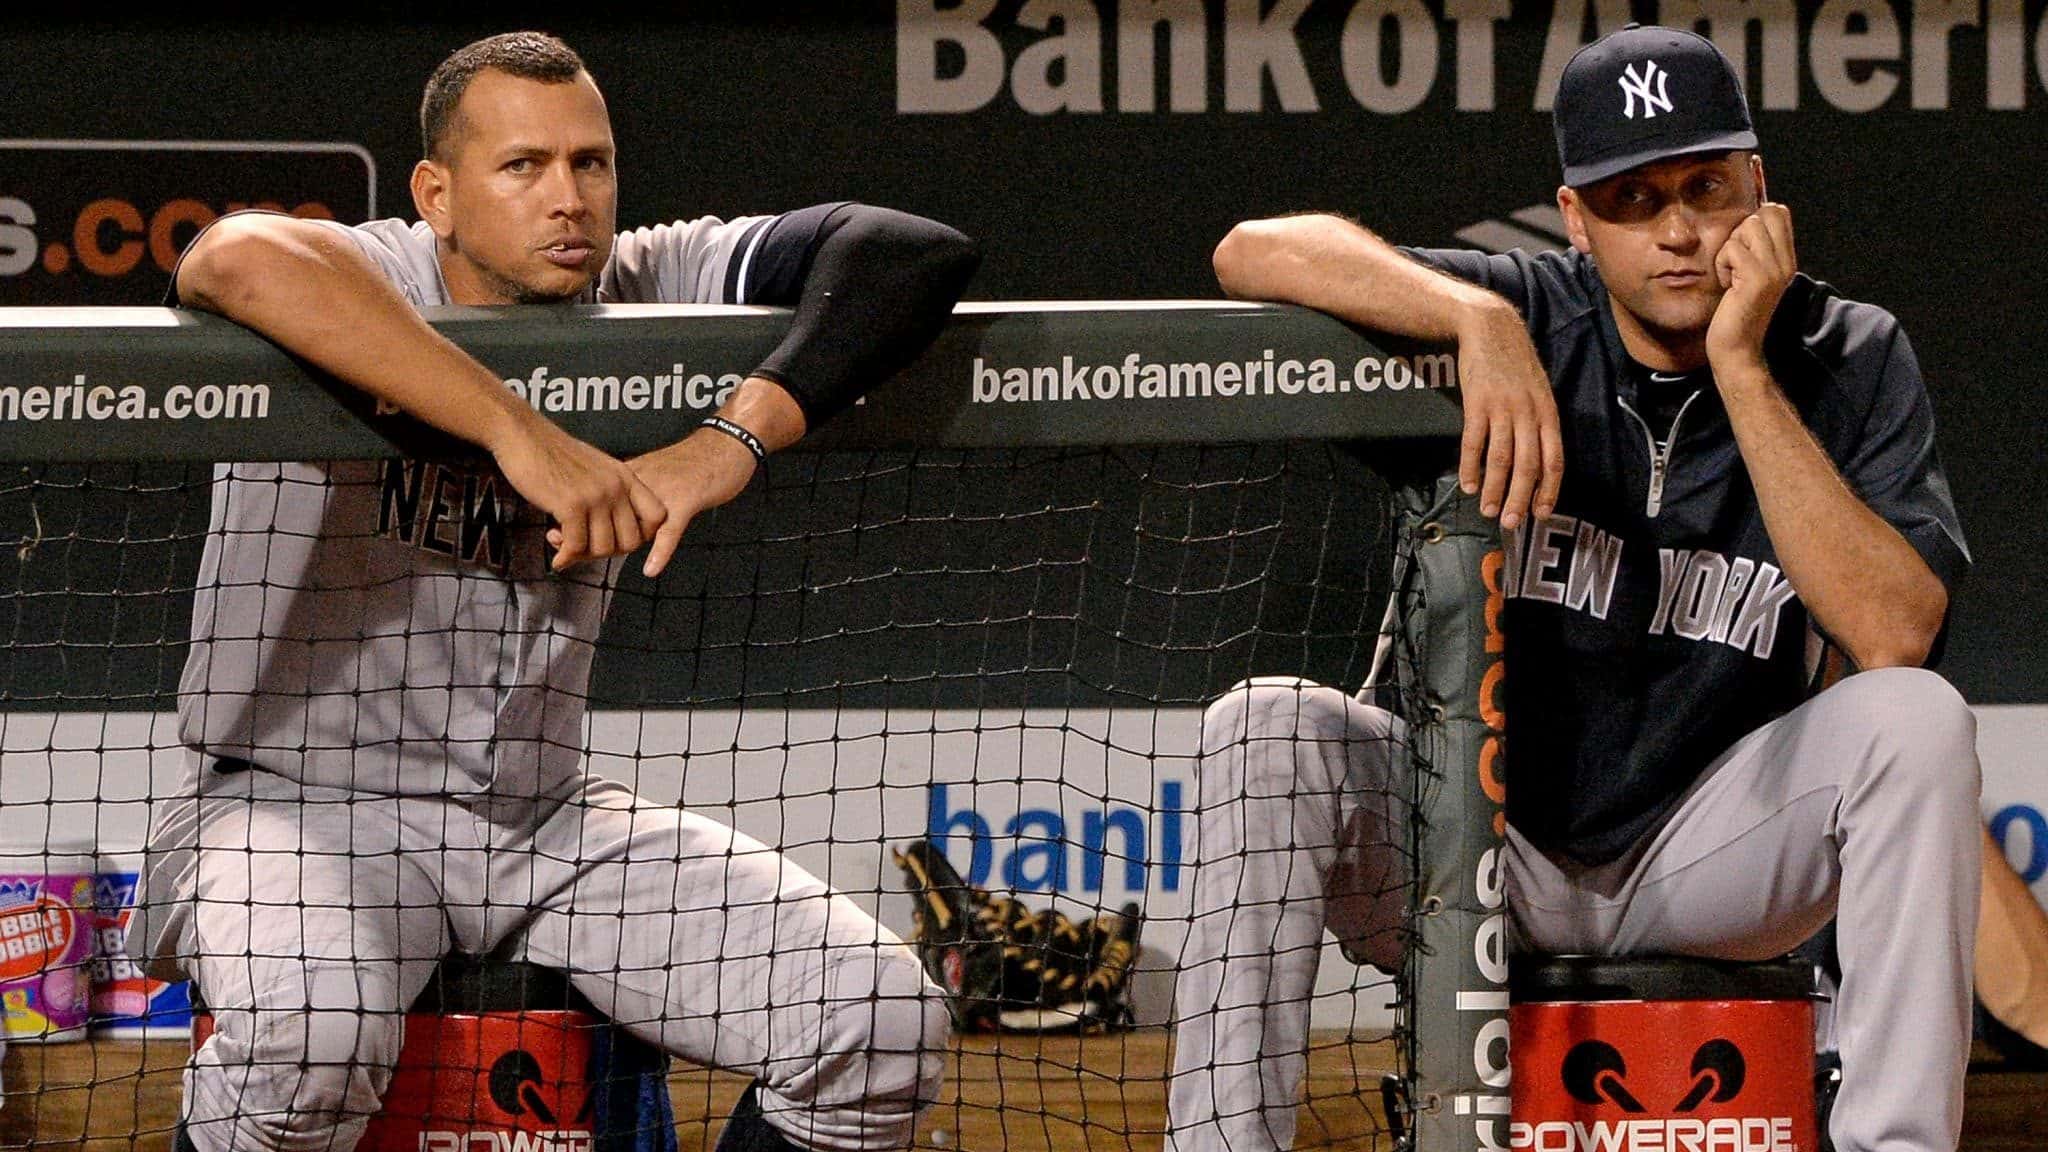 BALTIMORE, MD - SEPTEMBER 11: Alex Rodriguez #13 (L) and Derek Jeter #2 of the New York Yankees look on against the Baltimore Orioles in the ninth inning at Oriole Park at Camden Yards on September 11, 2013 in Baltimore, Maryland.